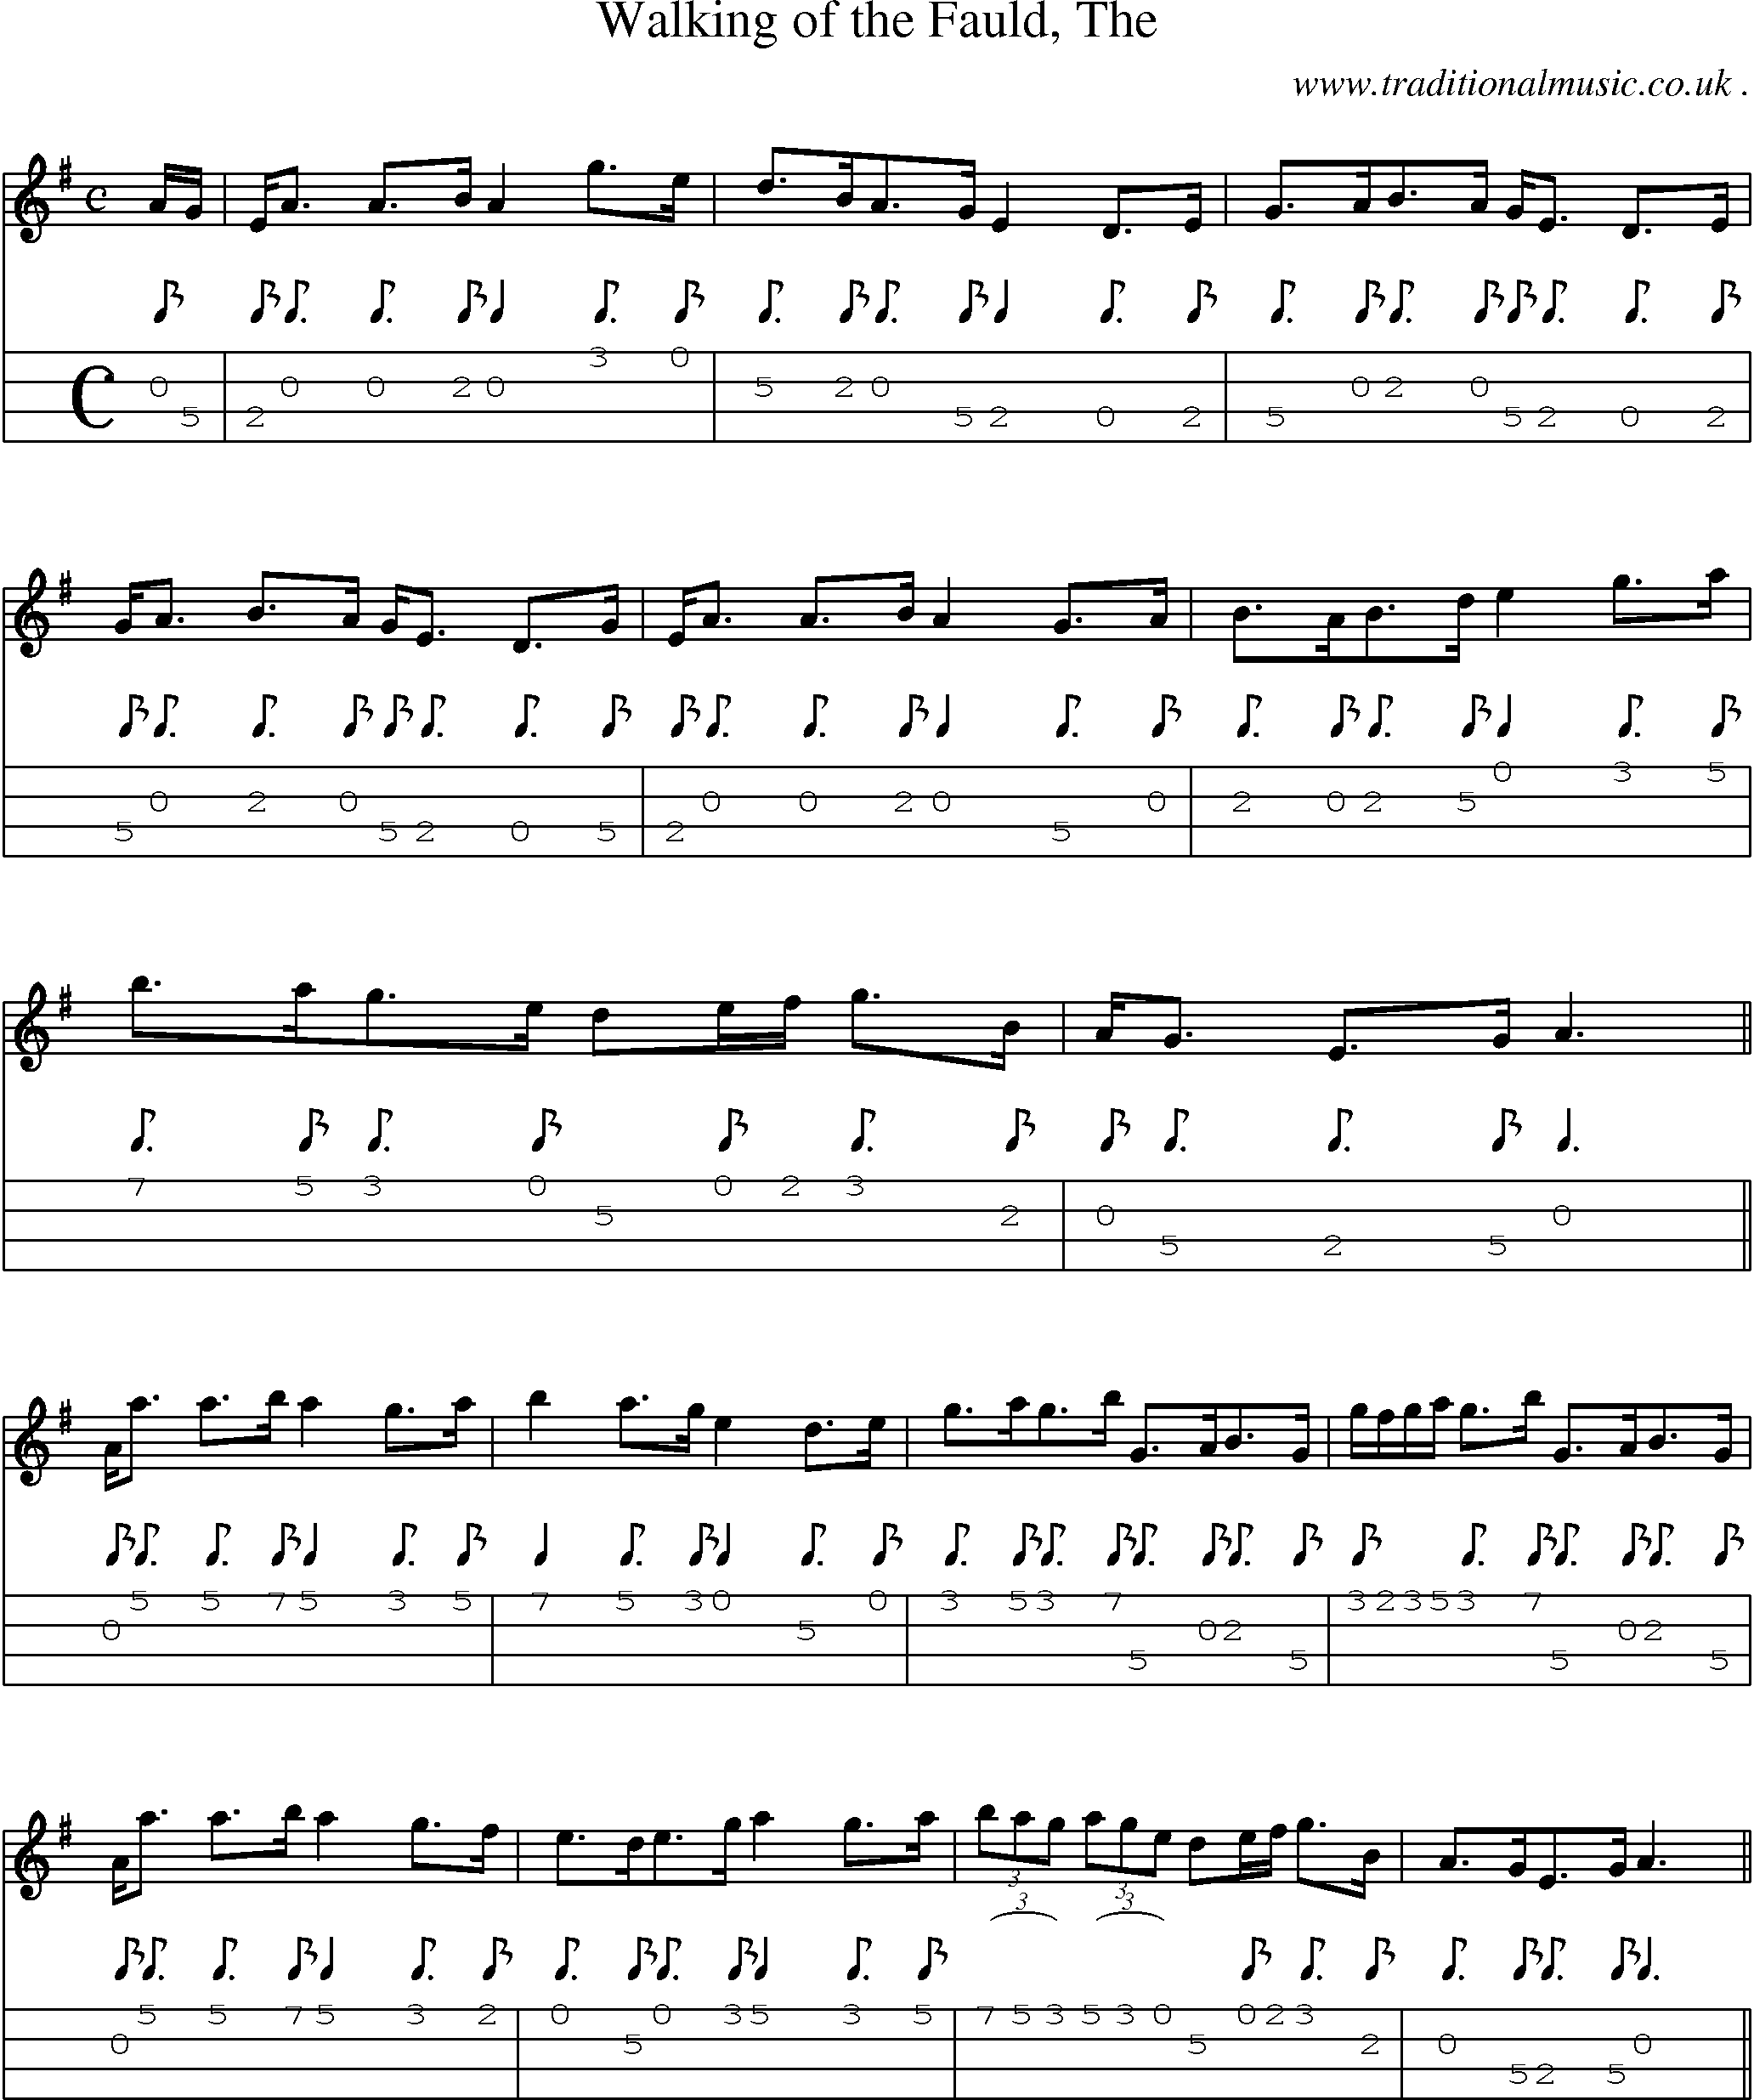 Sheet-music  score, Chords and Mandolin Tabs for Walking Of The Fauld The